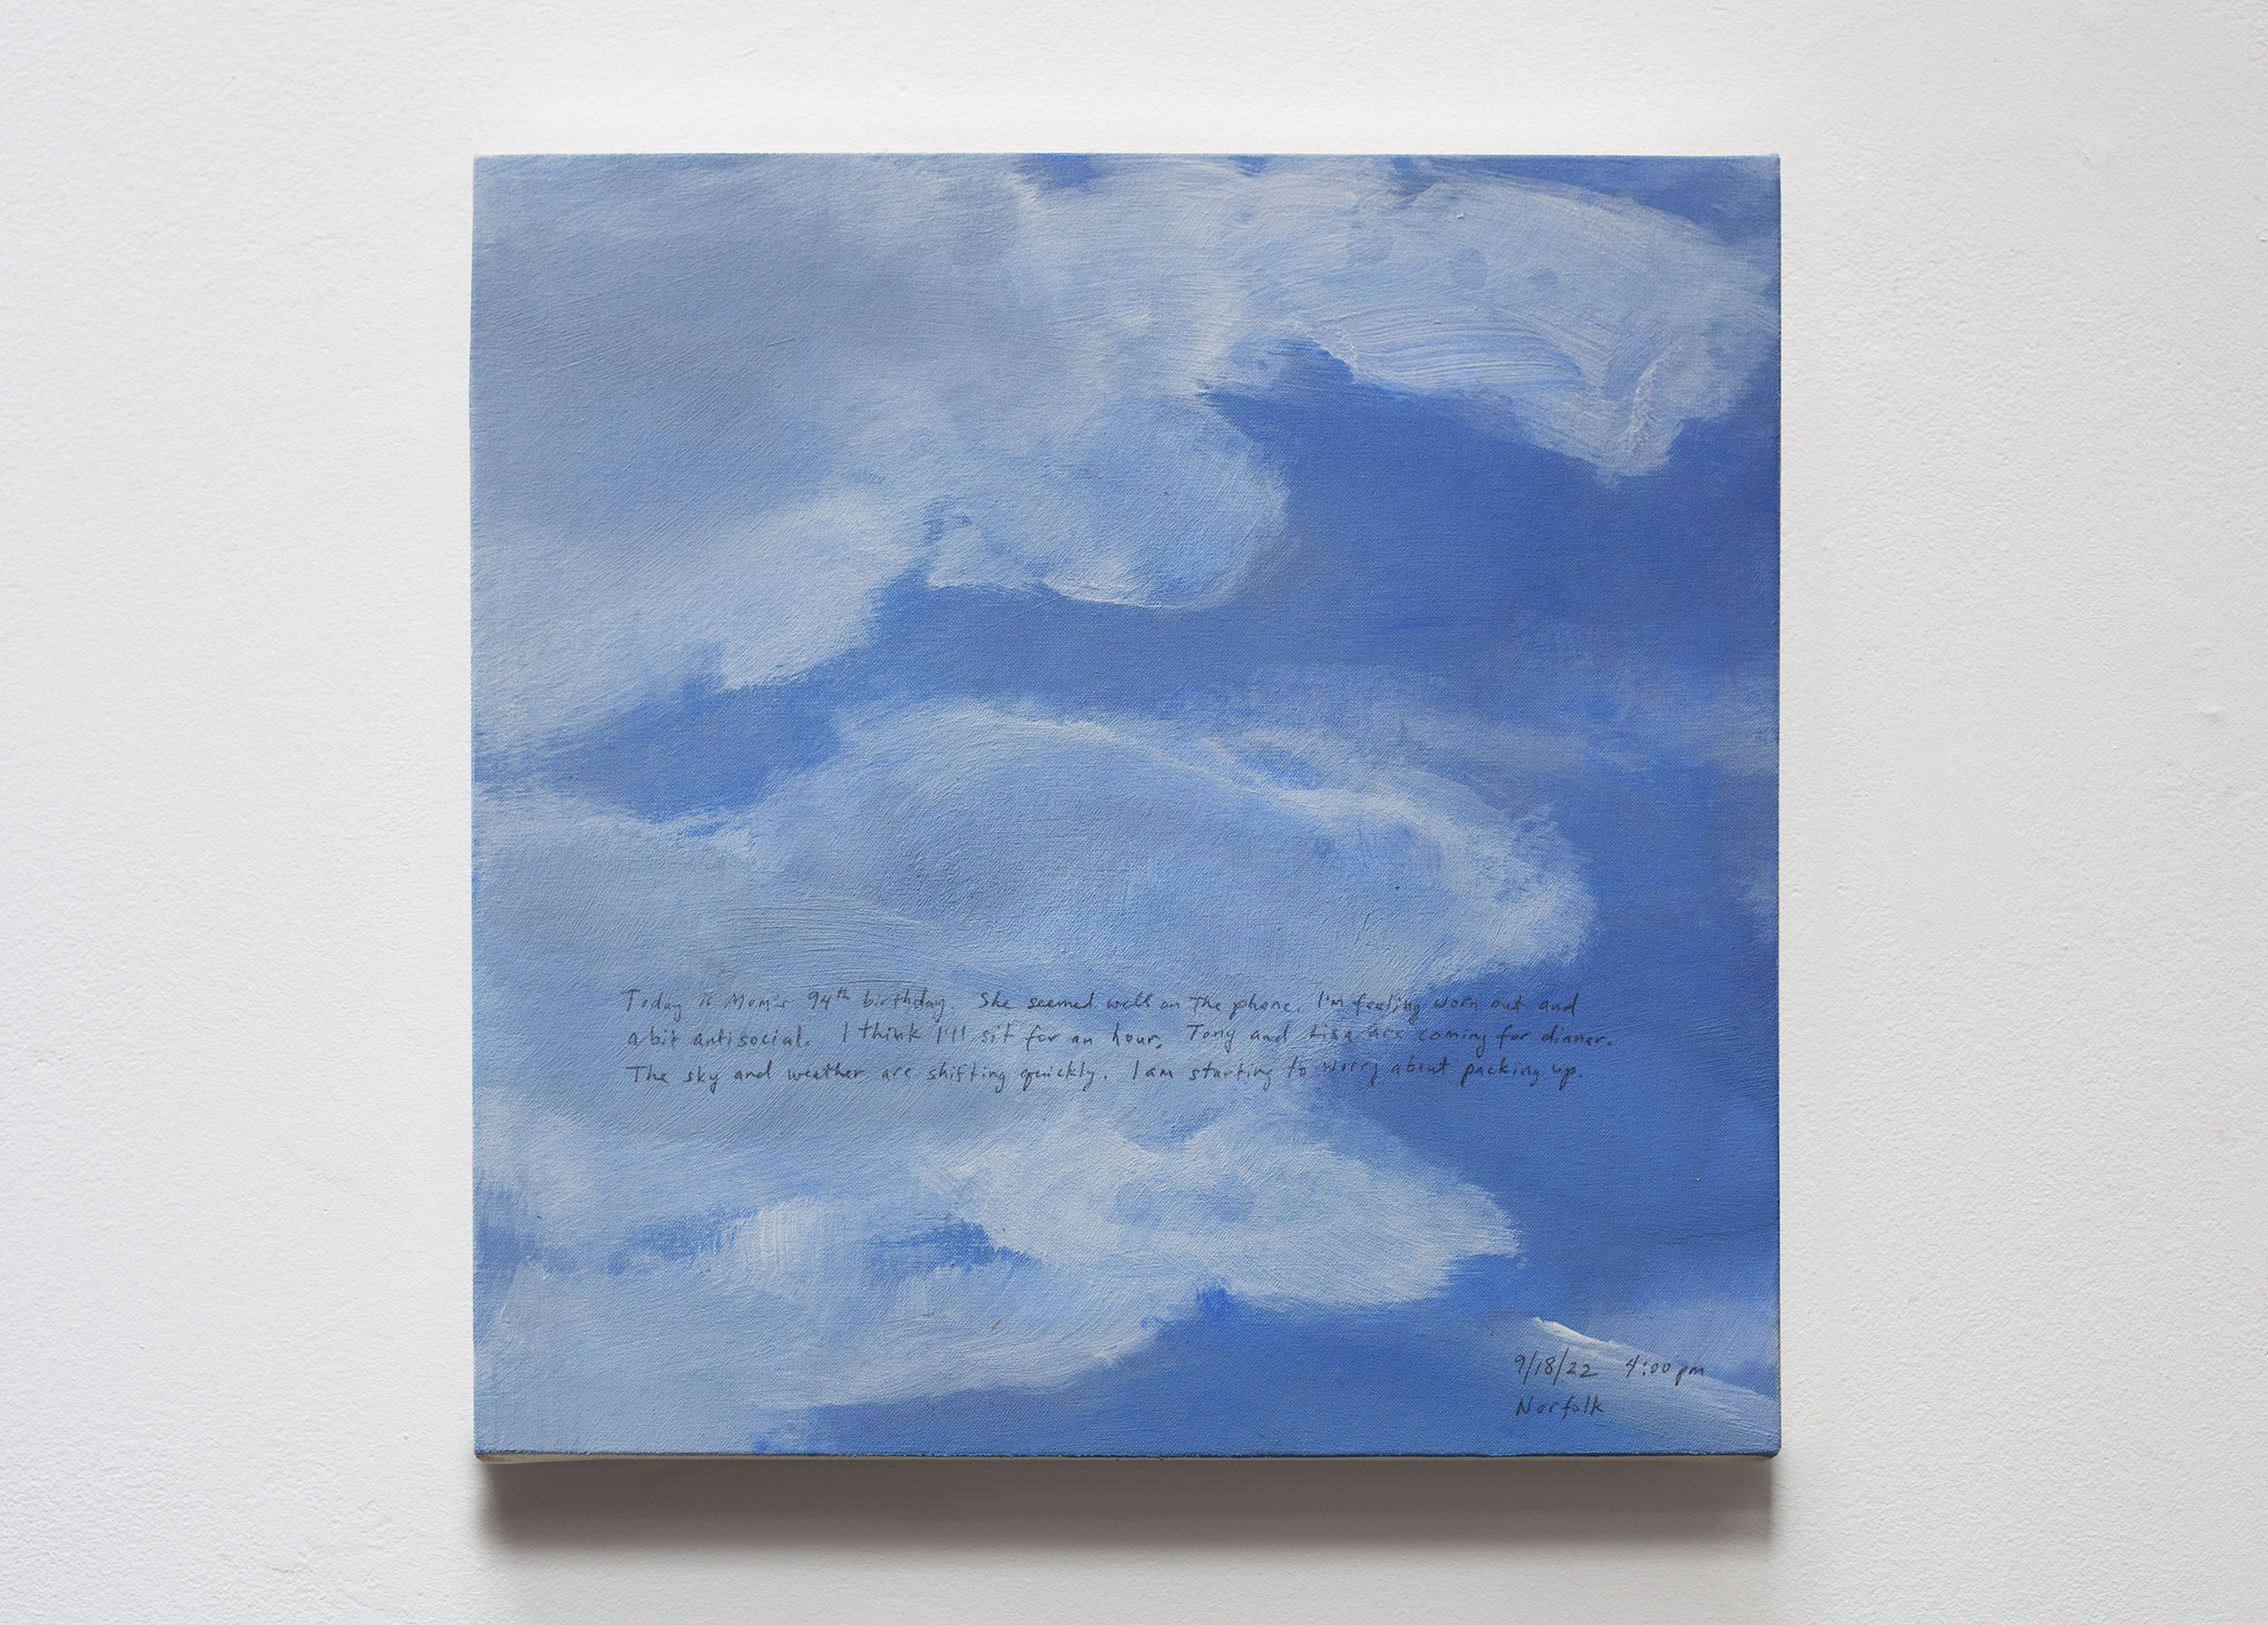 A 14 × 14 inch, acrylic painting of the sky. A journal entry is handwritten on the painting:

“Today is Mom’s 94th birthday. She seemed well on the phone. I’m feeling worn out and a bit antisocial. I think I’ll sit for an hour. Tony and Lisa are coming for dinner. The sky and weather are shifting quickly. I am starting to worry about packing up.

9/18/22 4:00 pm
Norfolk”